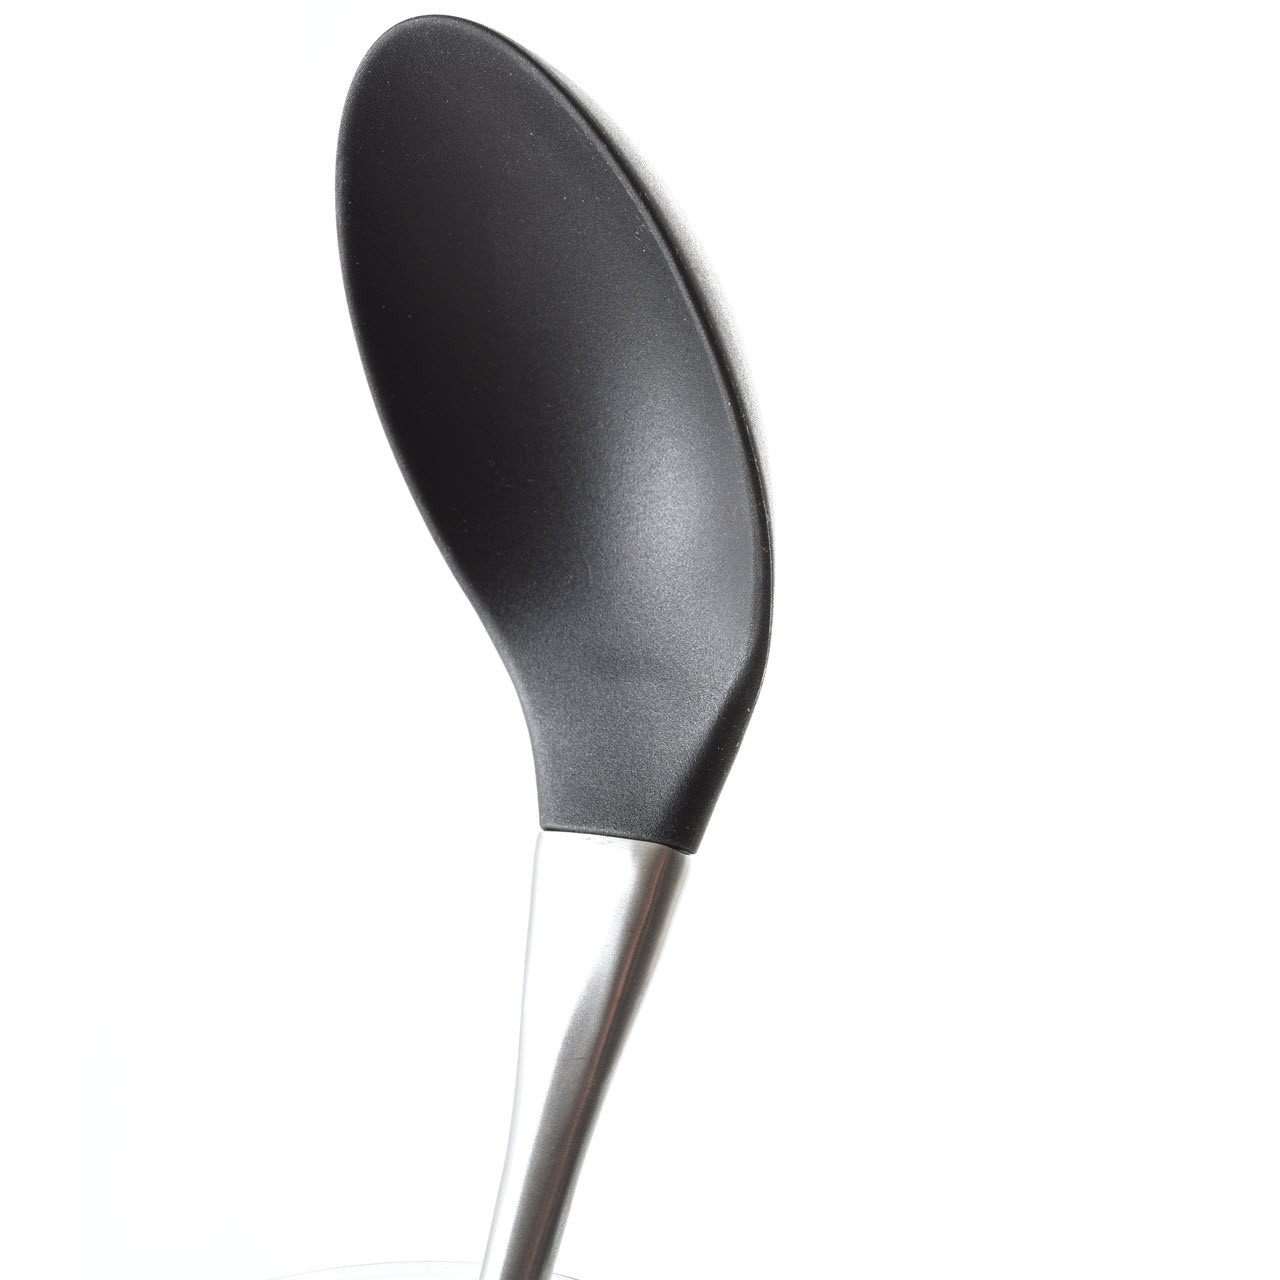 https://cdn11.bigcommerce.com/s-21kj3ntgv1/images/stencil/1280x1280/products/479/1658/Solid-Spoon-Silicone-and-Stainless-Steel-Silicone-Head-View__80535.1617909862.jpg?c=2